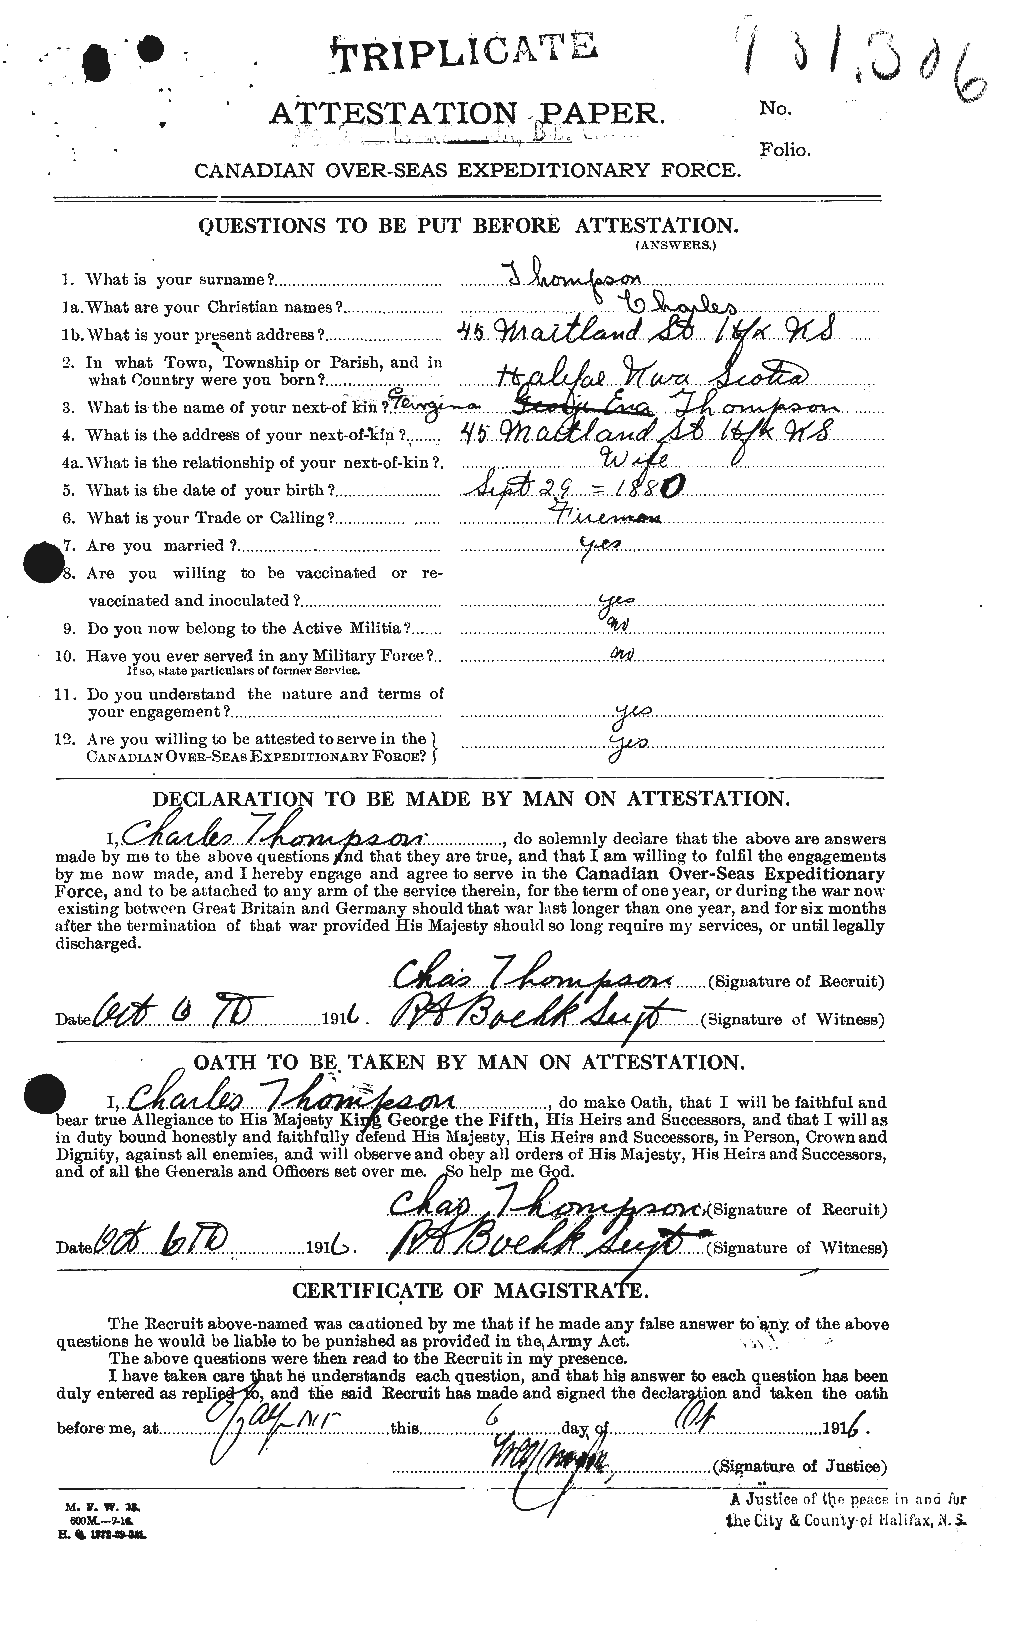 Personnel Records of the First World War - CEF 630353a